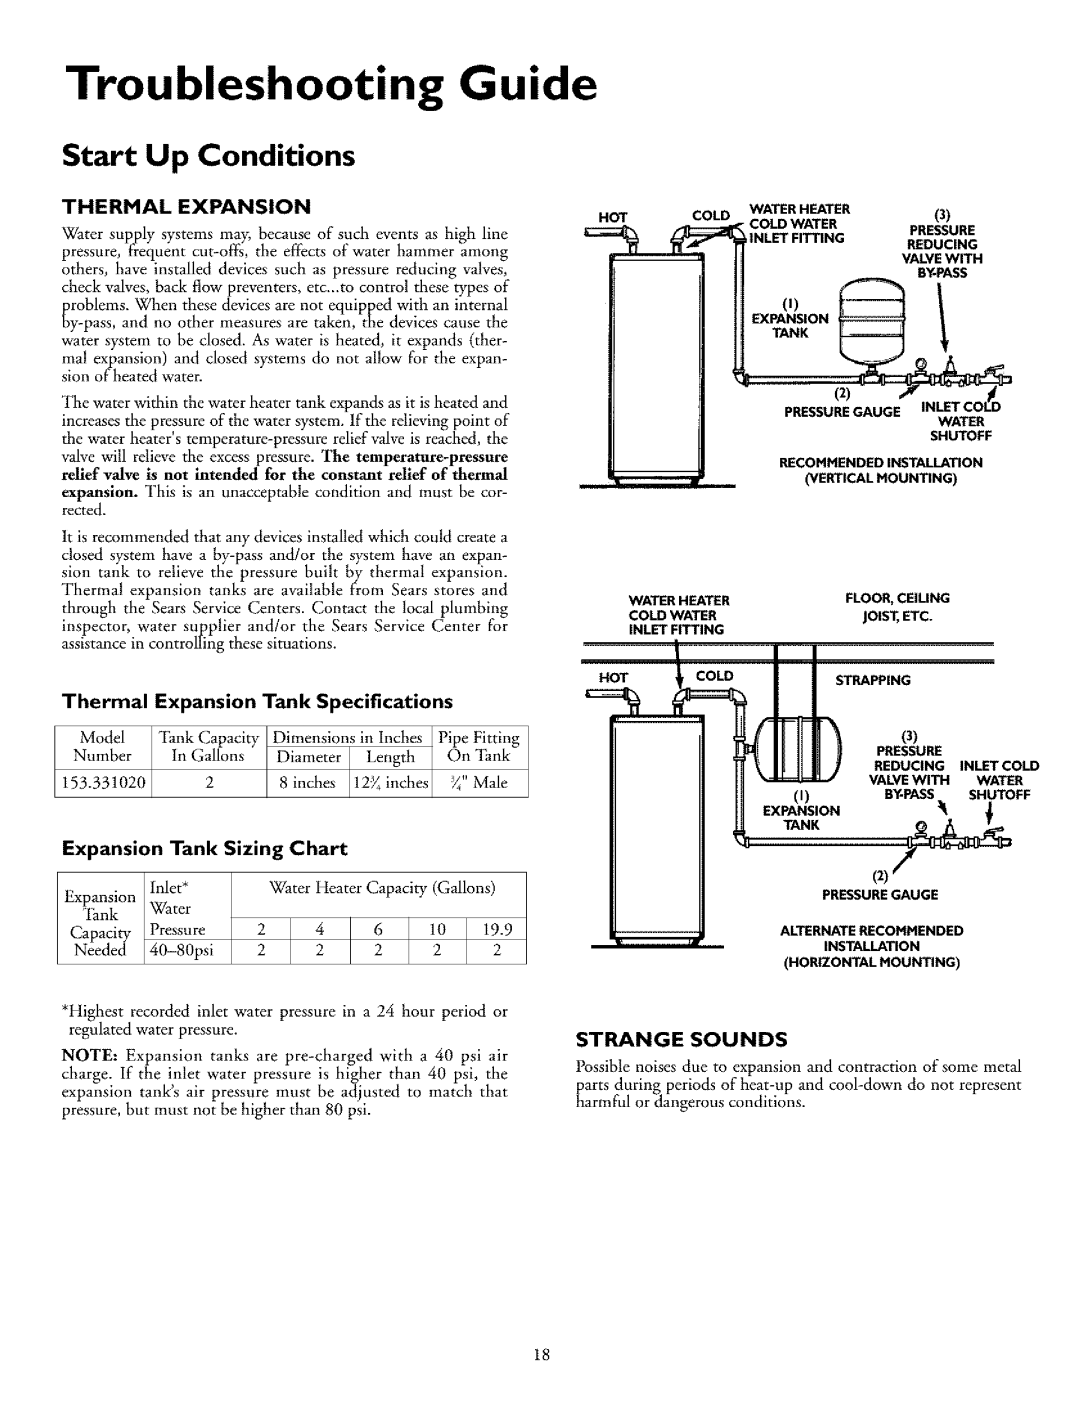 Kenmore 153.31702 Troubleshooting, Guide, Start, Conditions, Thermal Expansion Tank Specifications, Sizing, Chart 